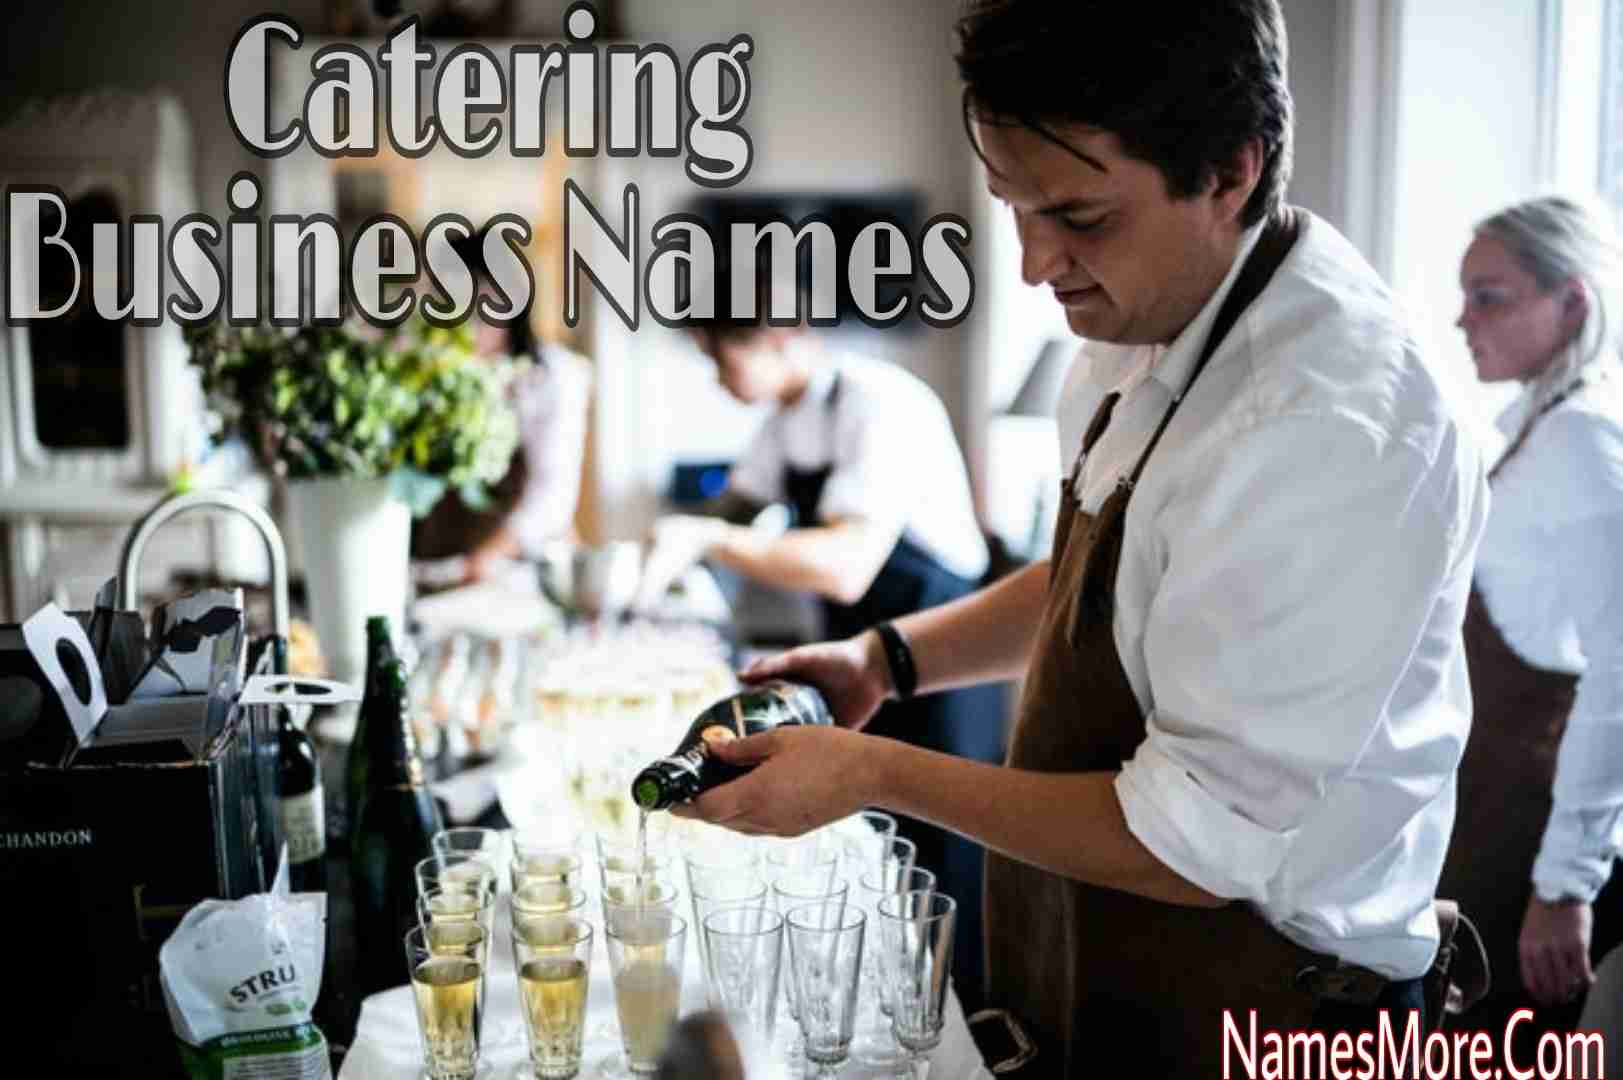 Featured Image for Catering Business Names: [900+ Catering Company Names]